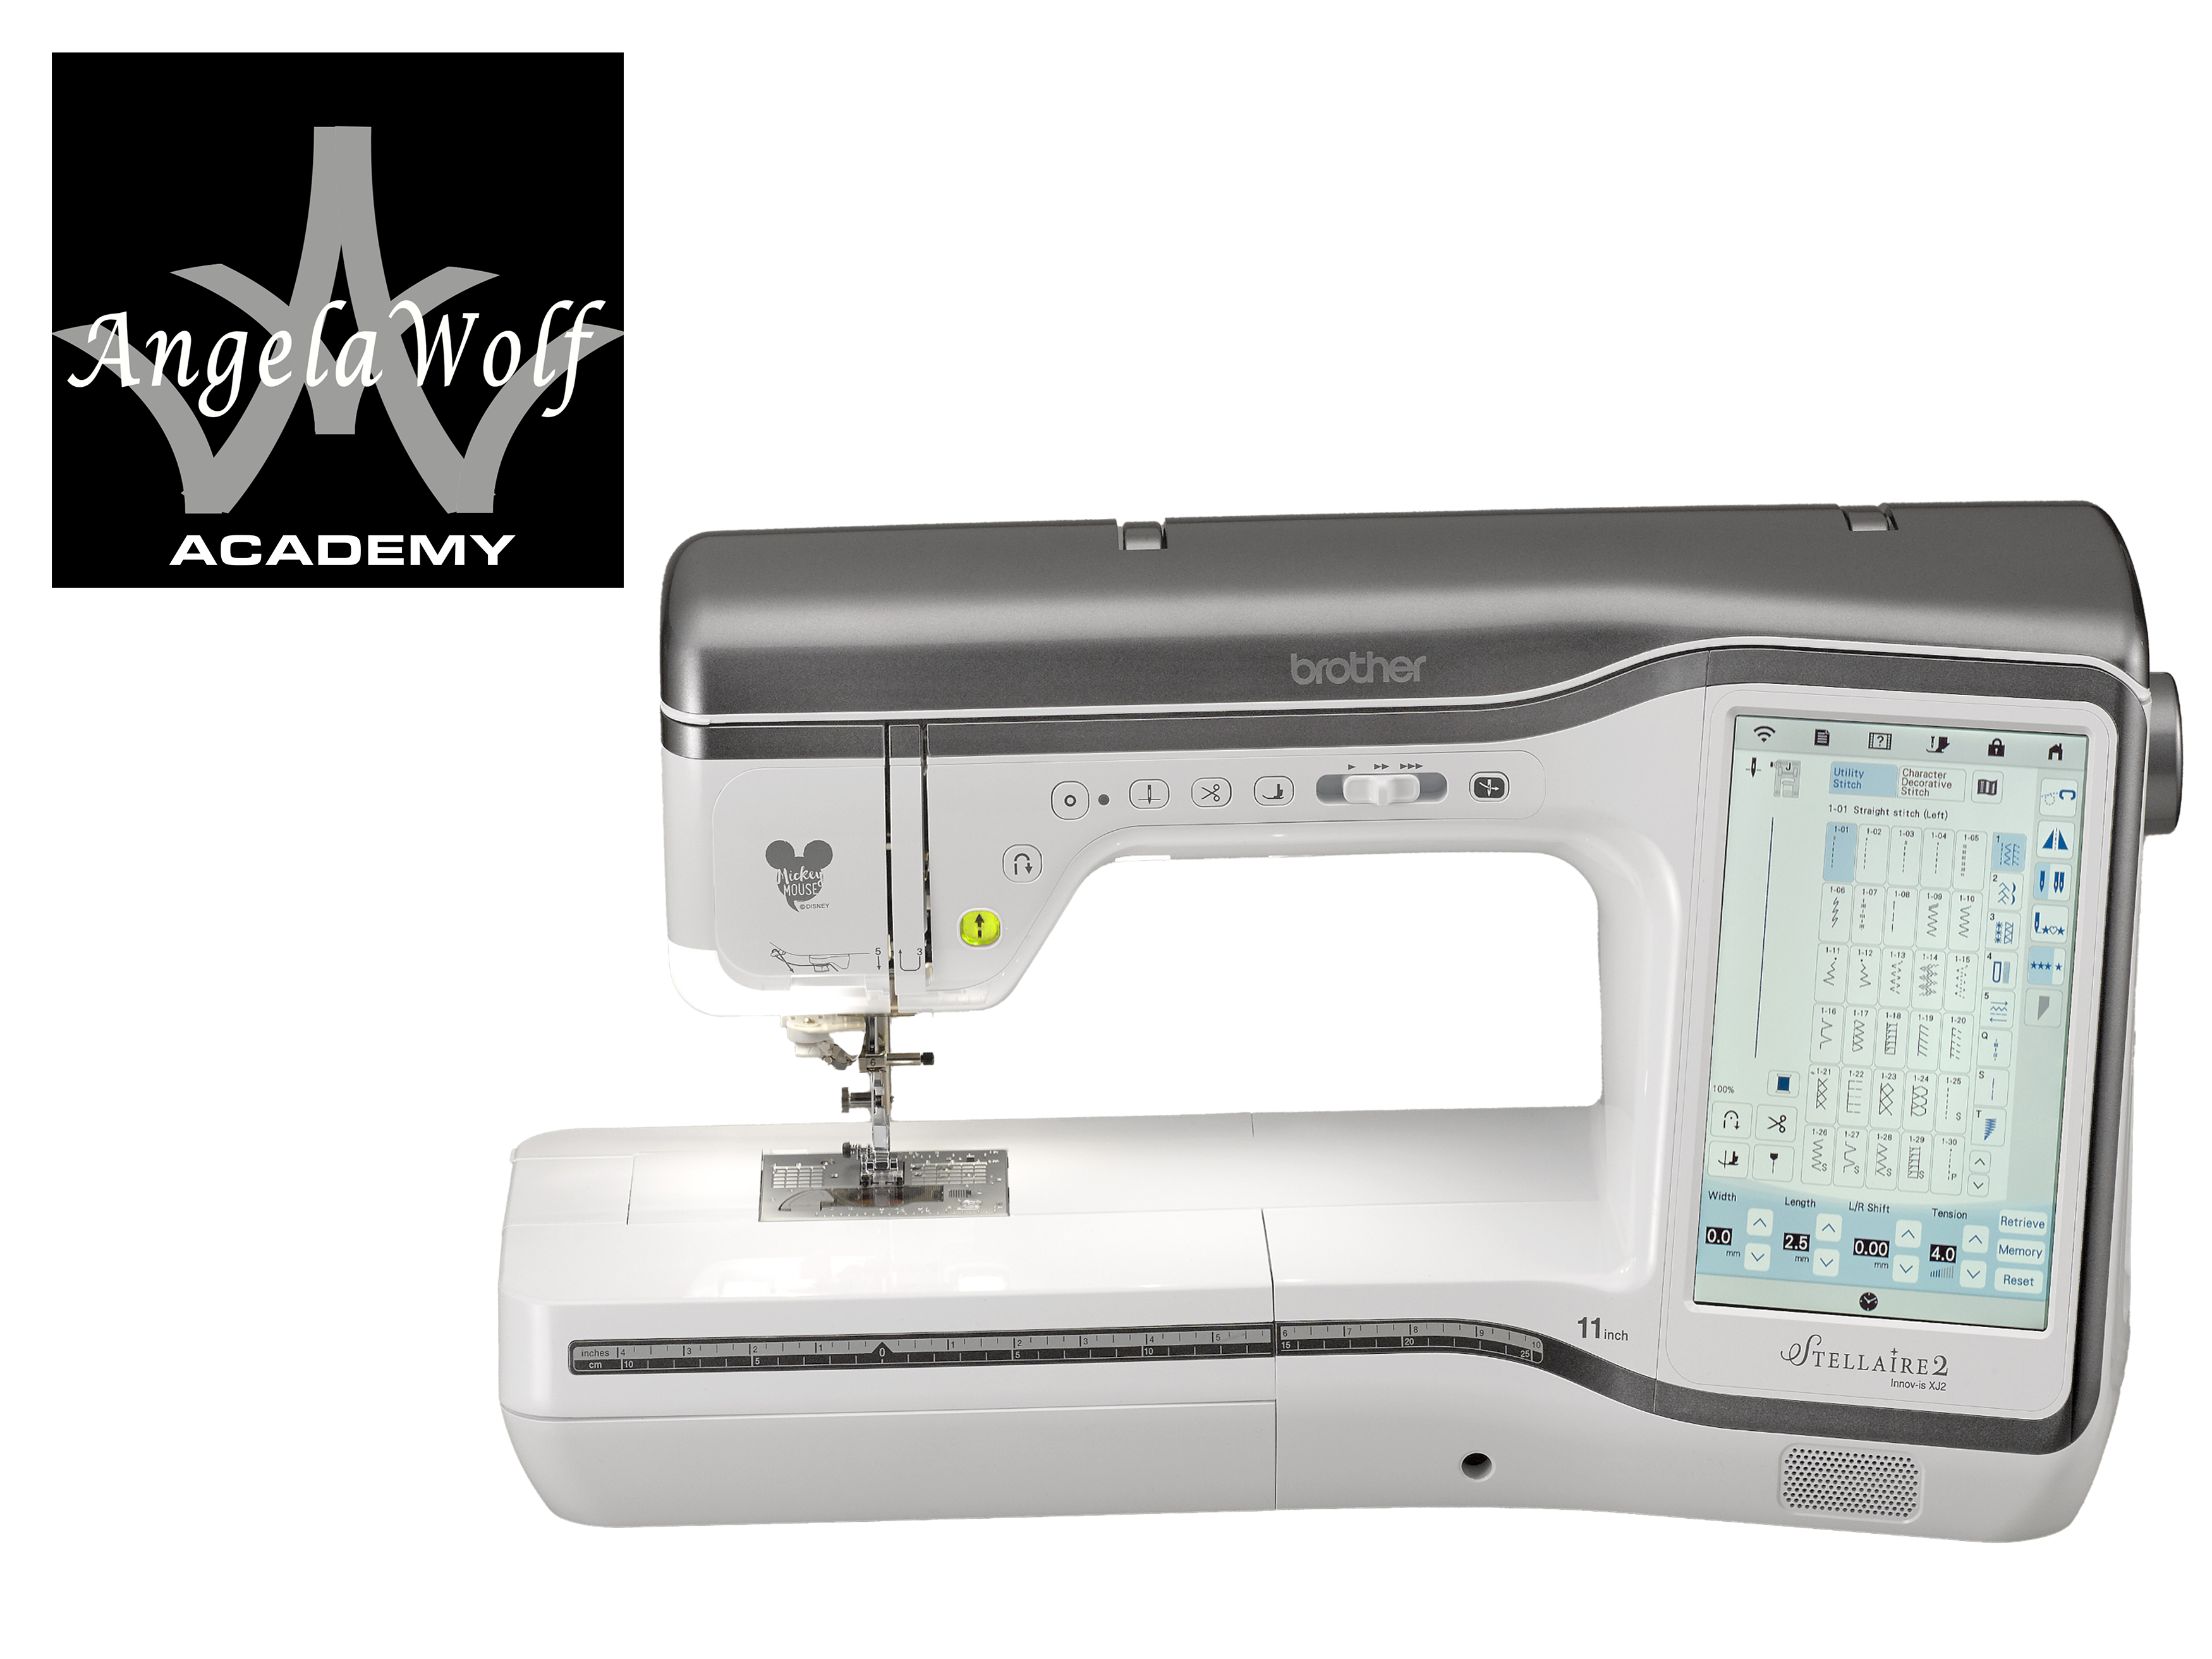 Combination sewing and embroidery machines